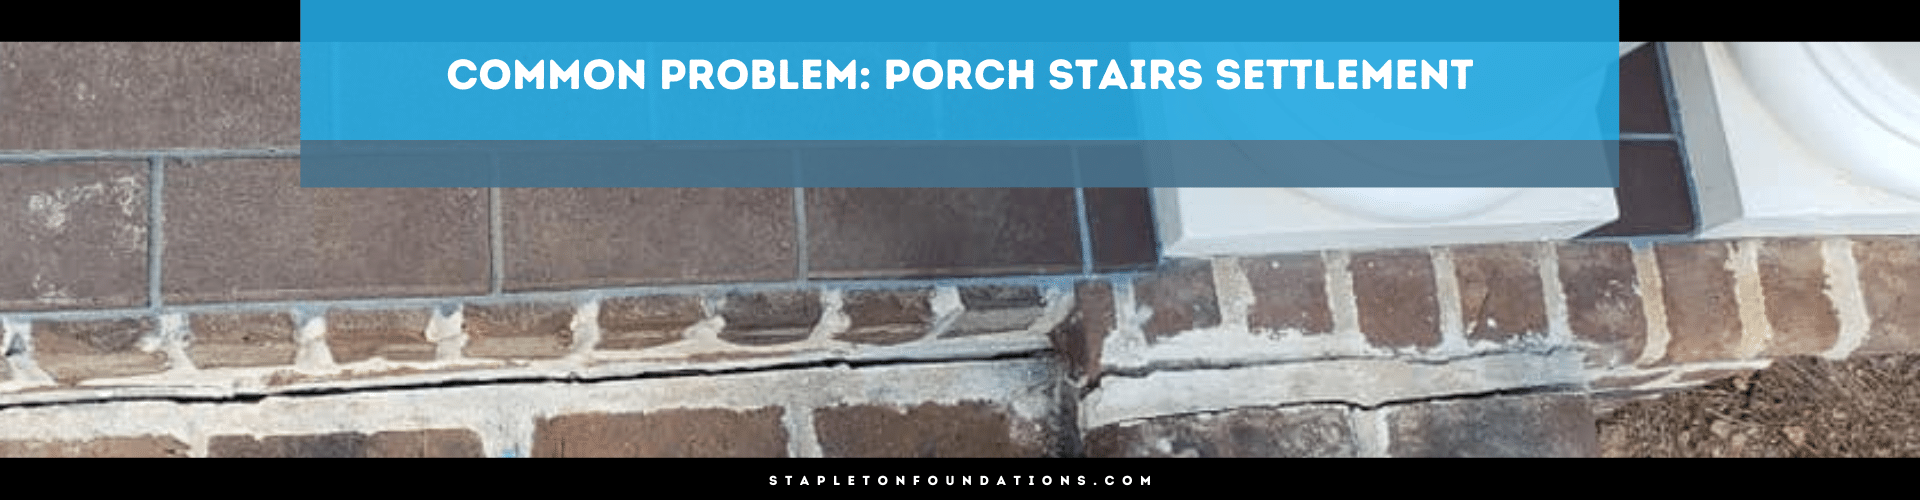 Porch stairs settlement is a common foundation problem